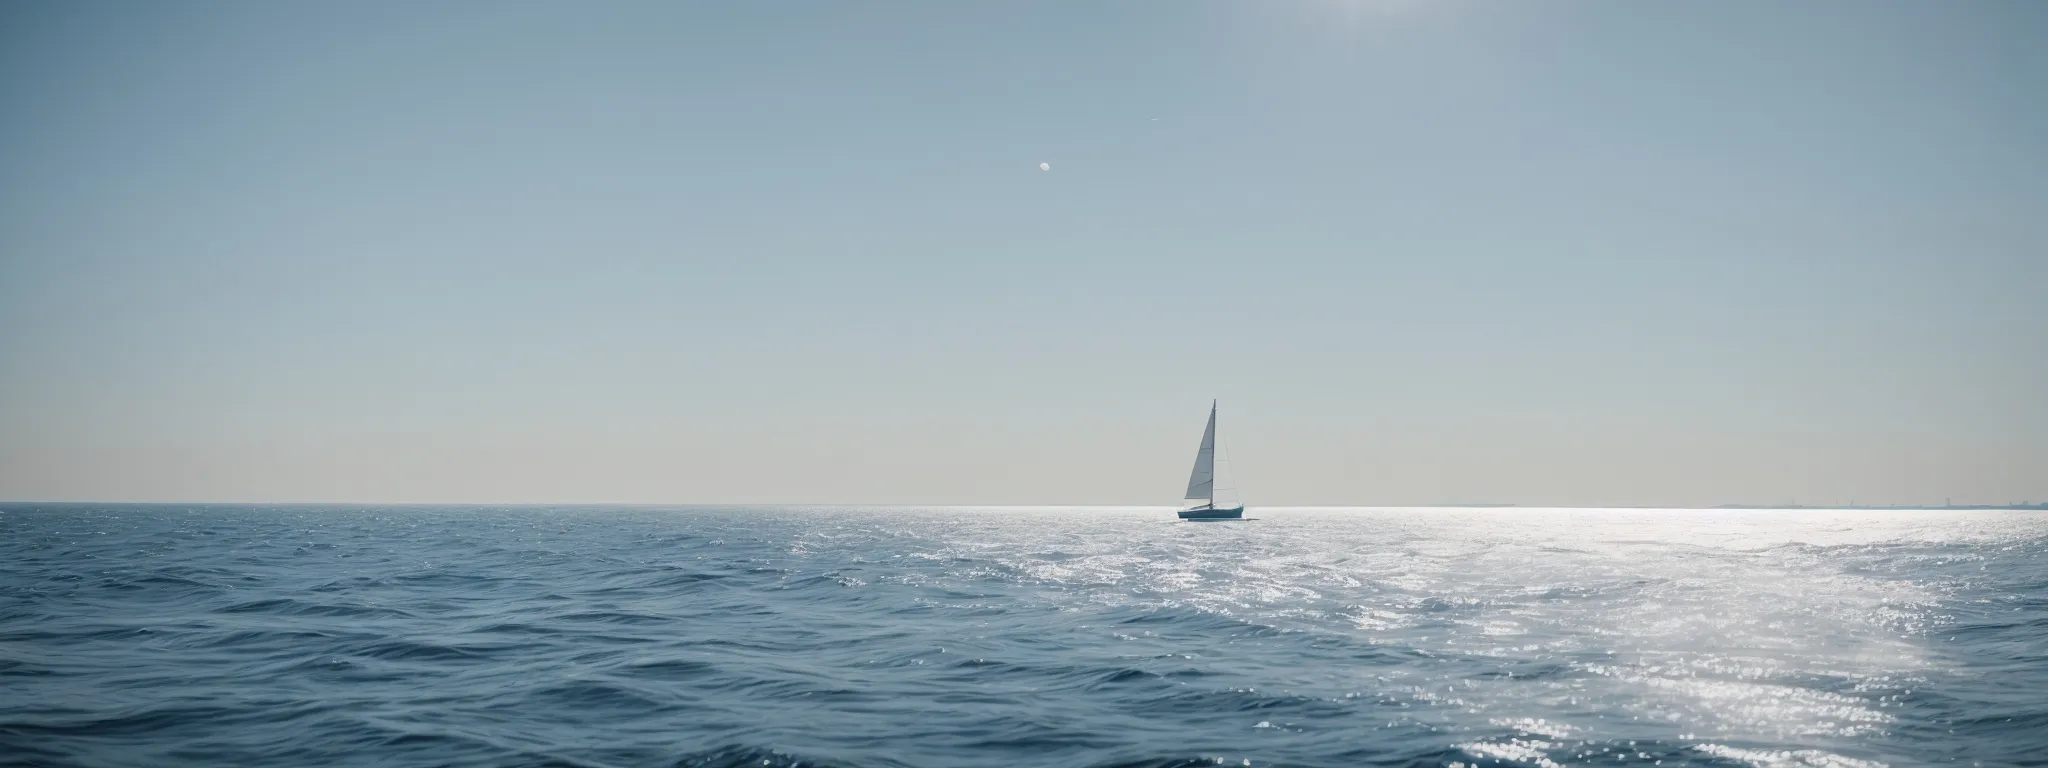 a sailboat gliding on vast open waters under a clear sky, emblematic of exploration.